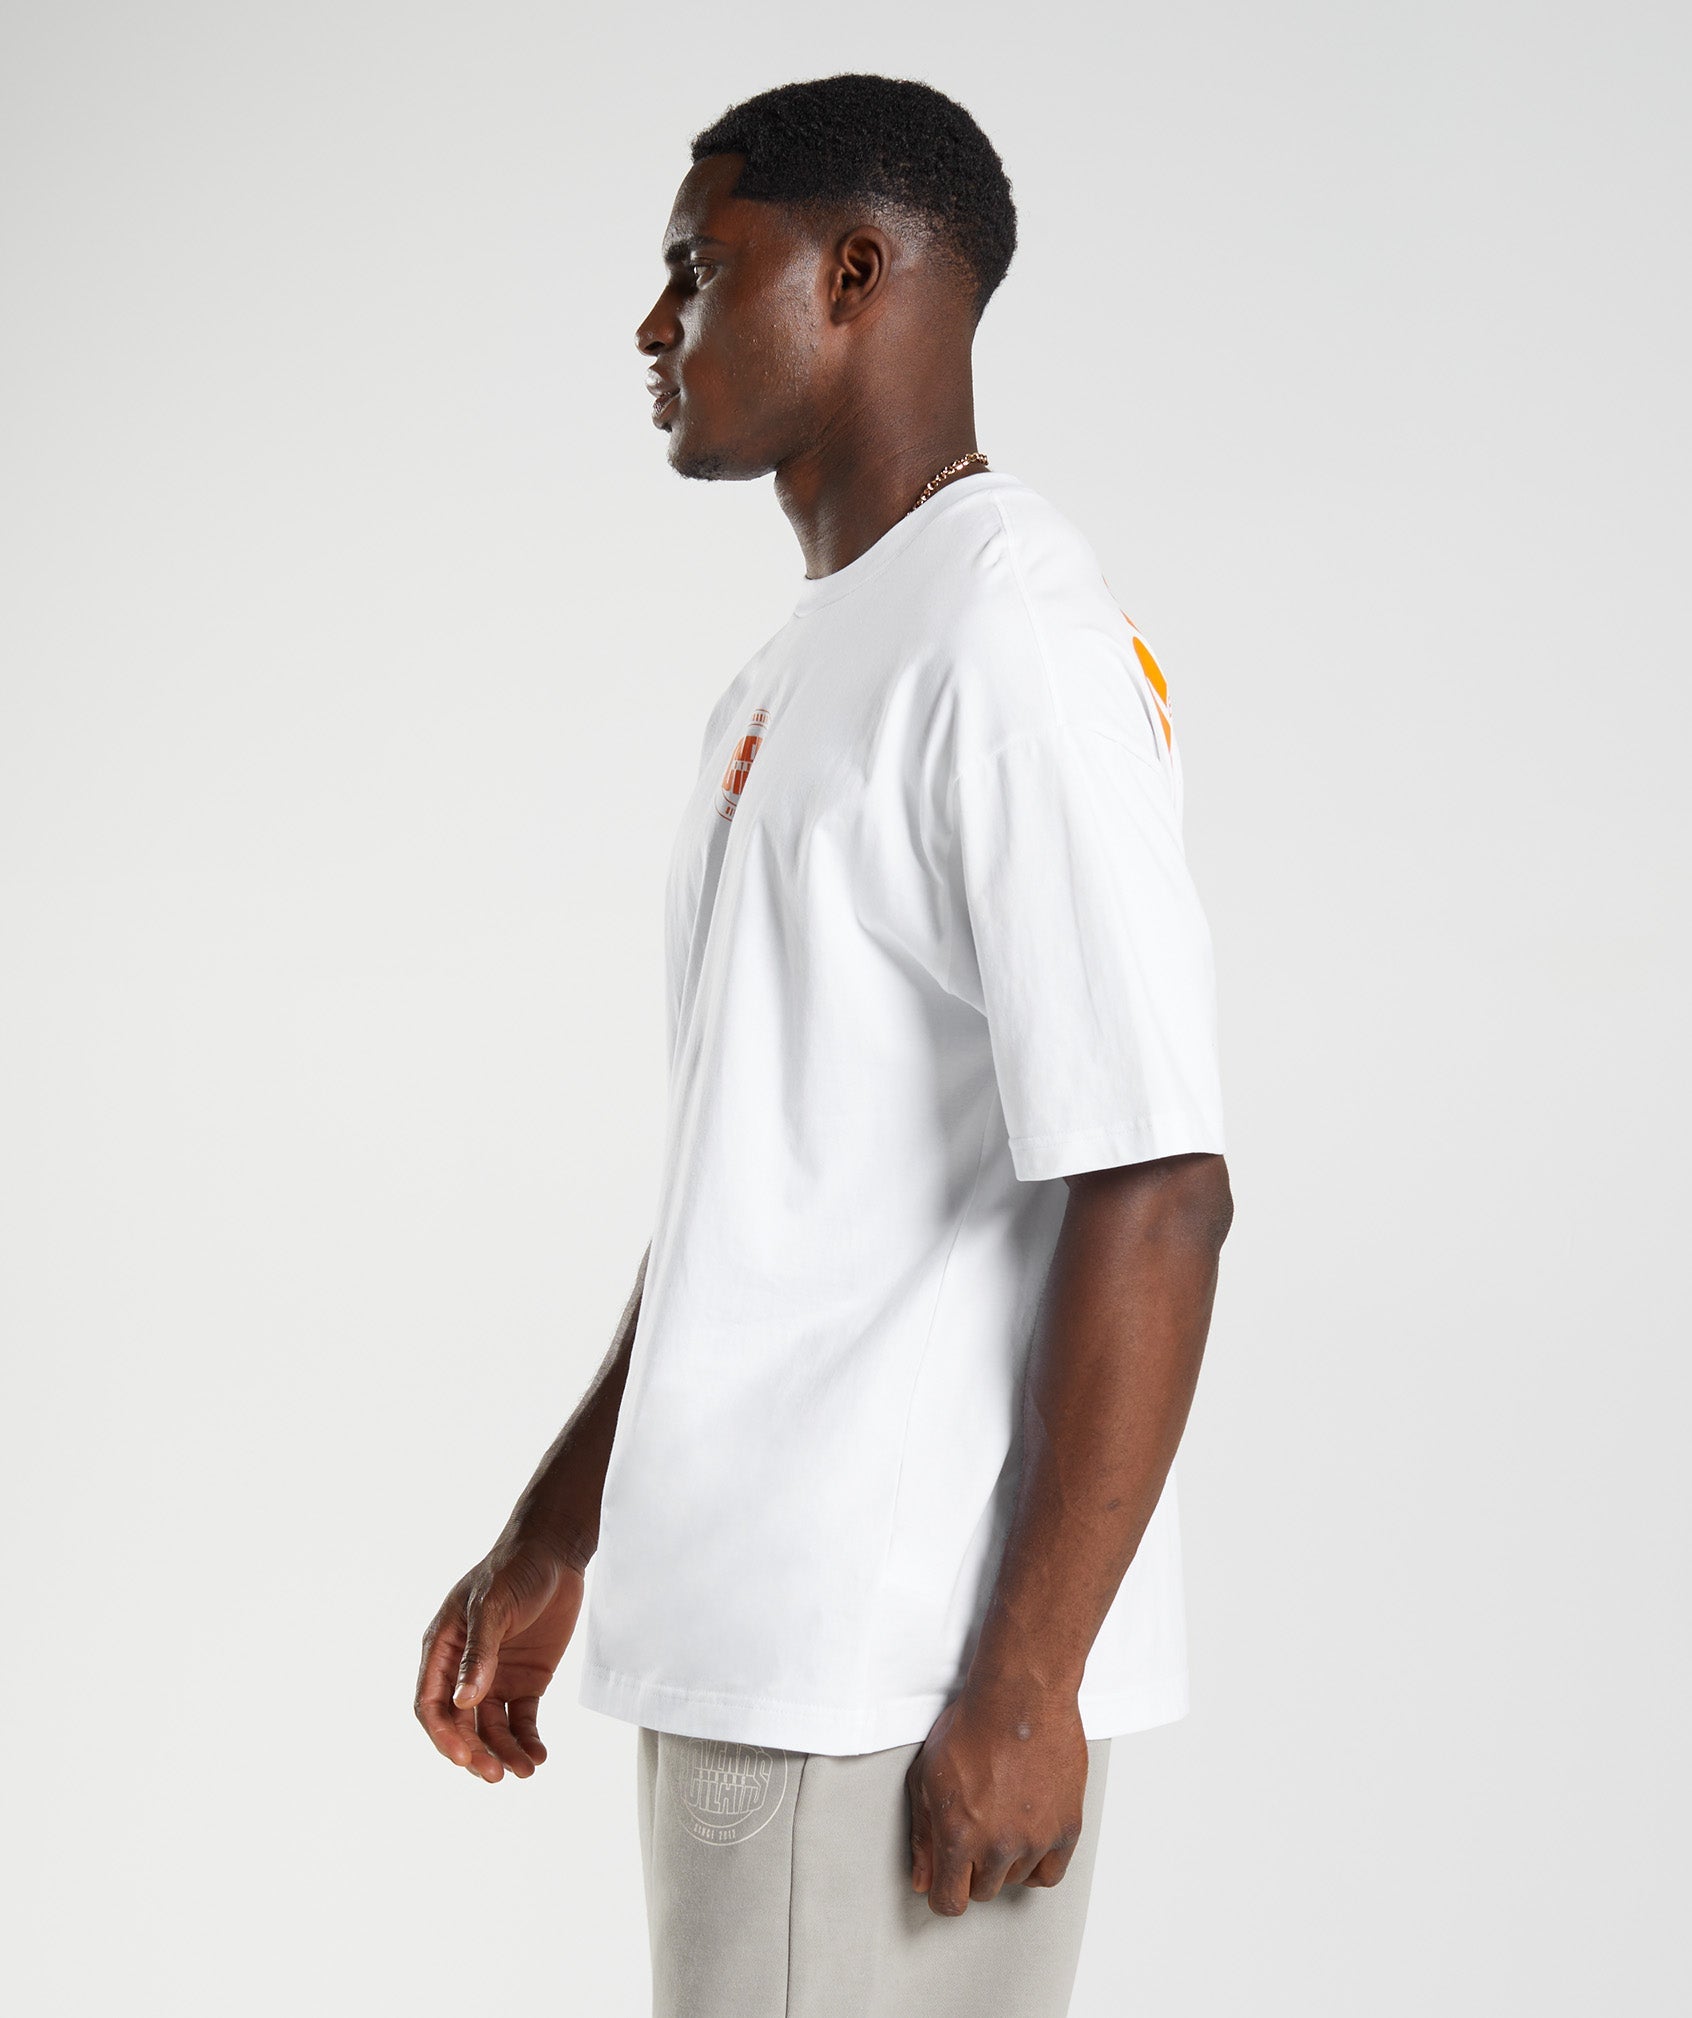 GS10 Year Oversized T-Shirt in White